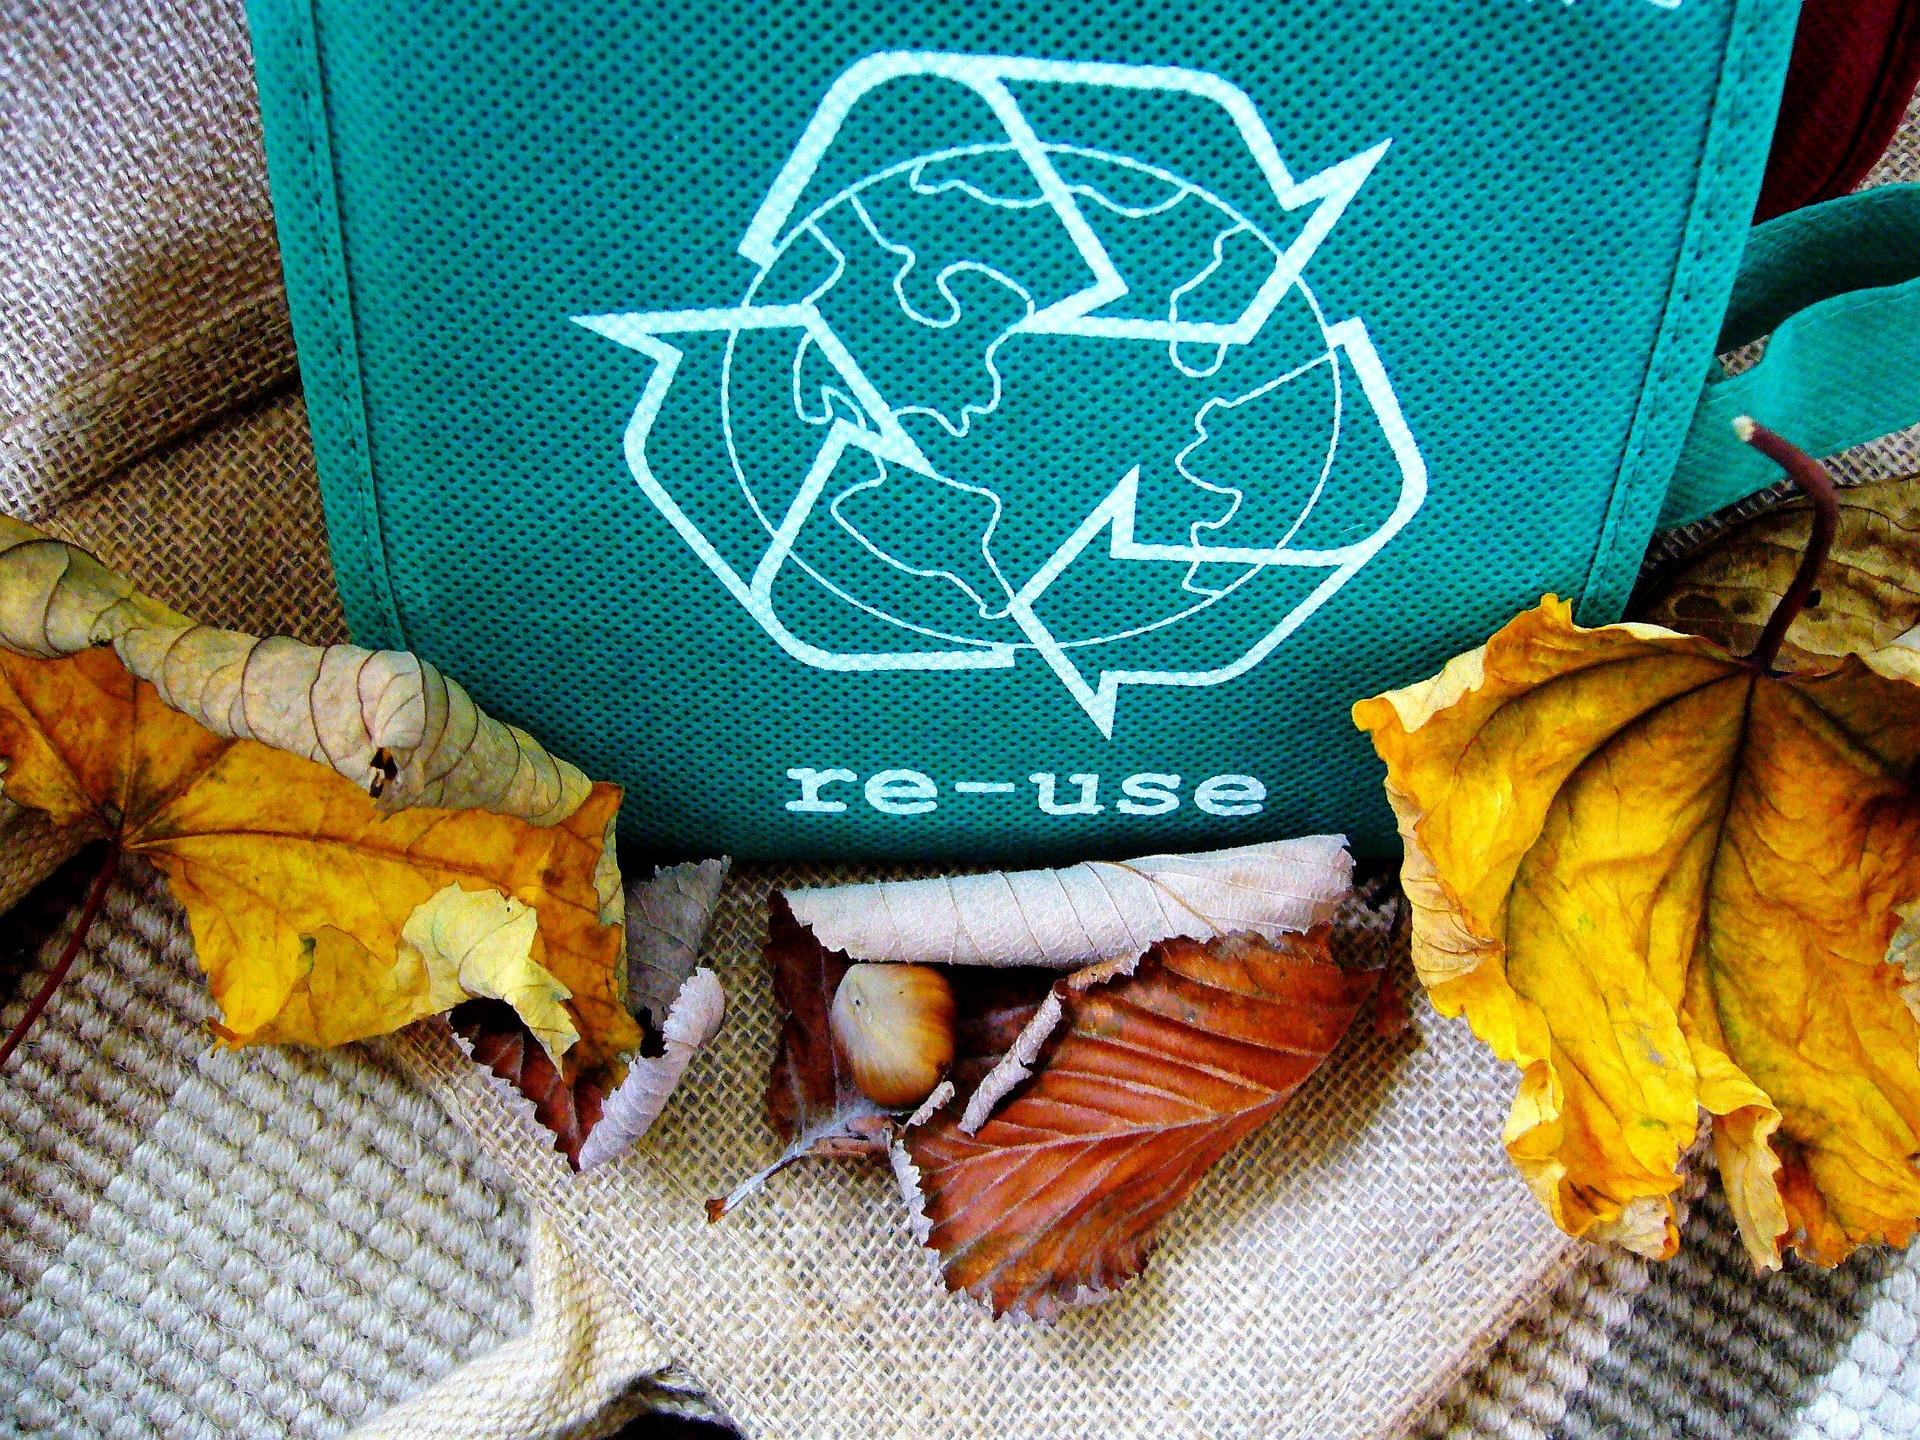 The Story Behind “Reduce, Reuse, Recycle”